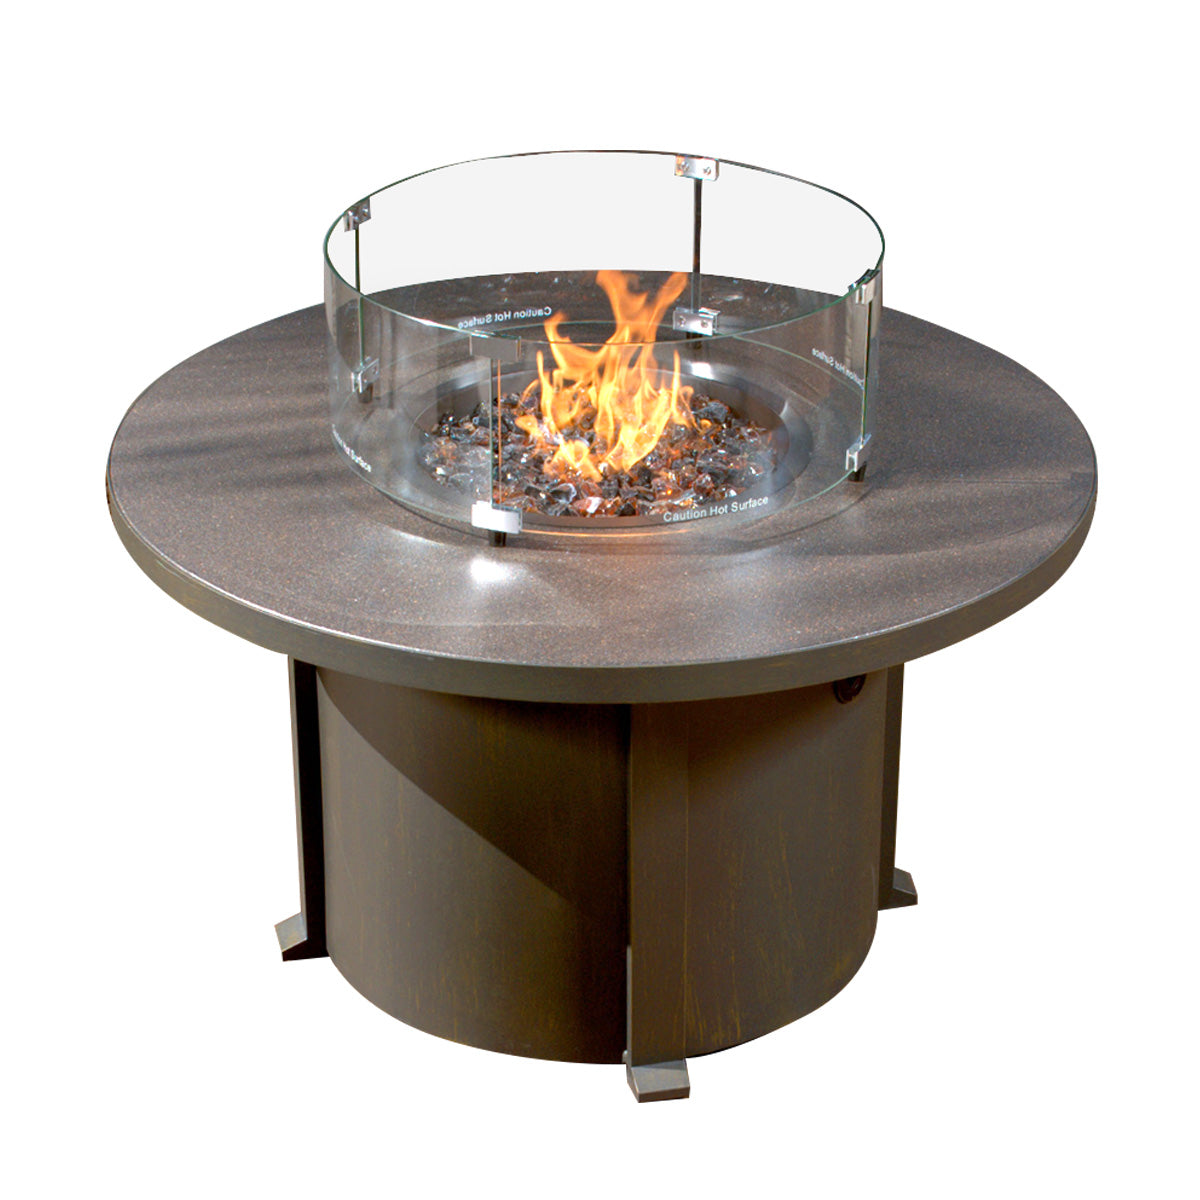 Forever Patio 42″ Cal Sil Round Fire Table by NorthCape International